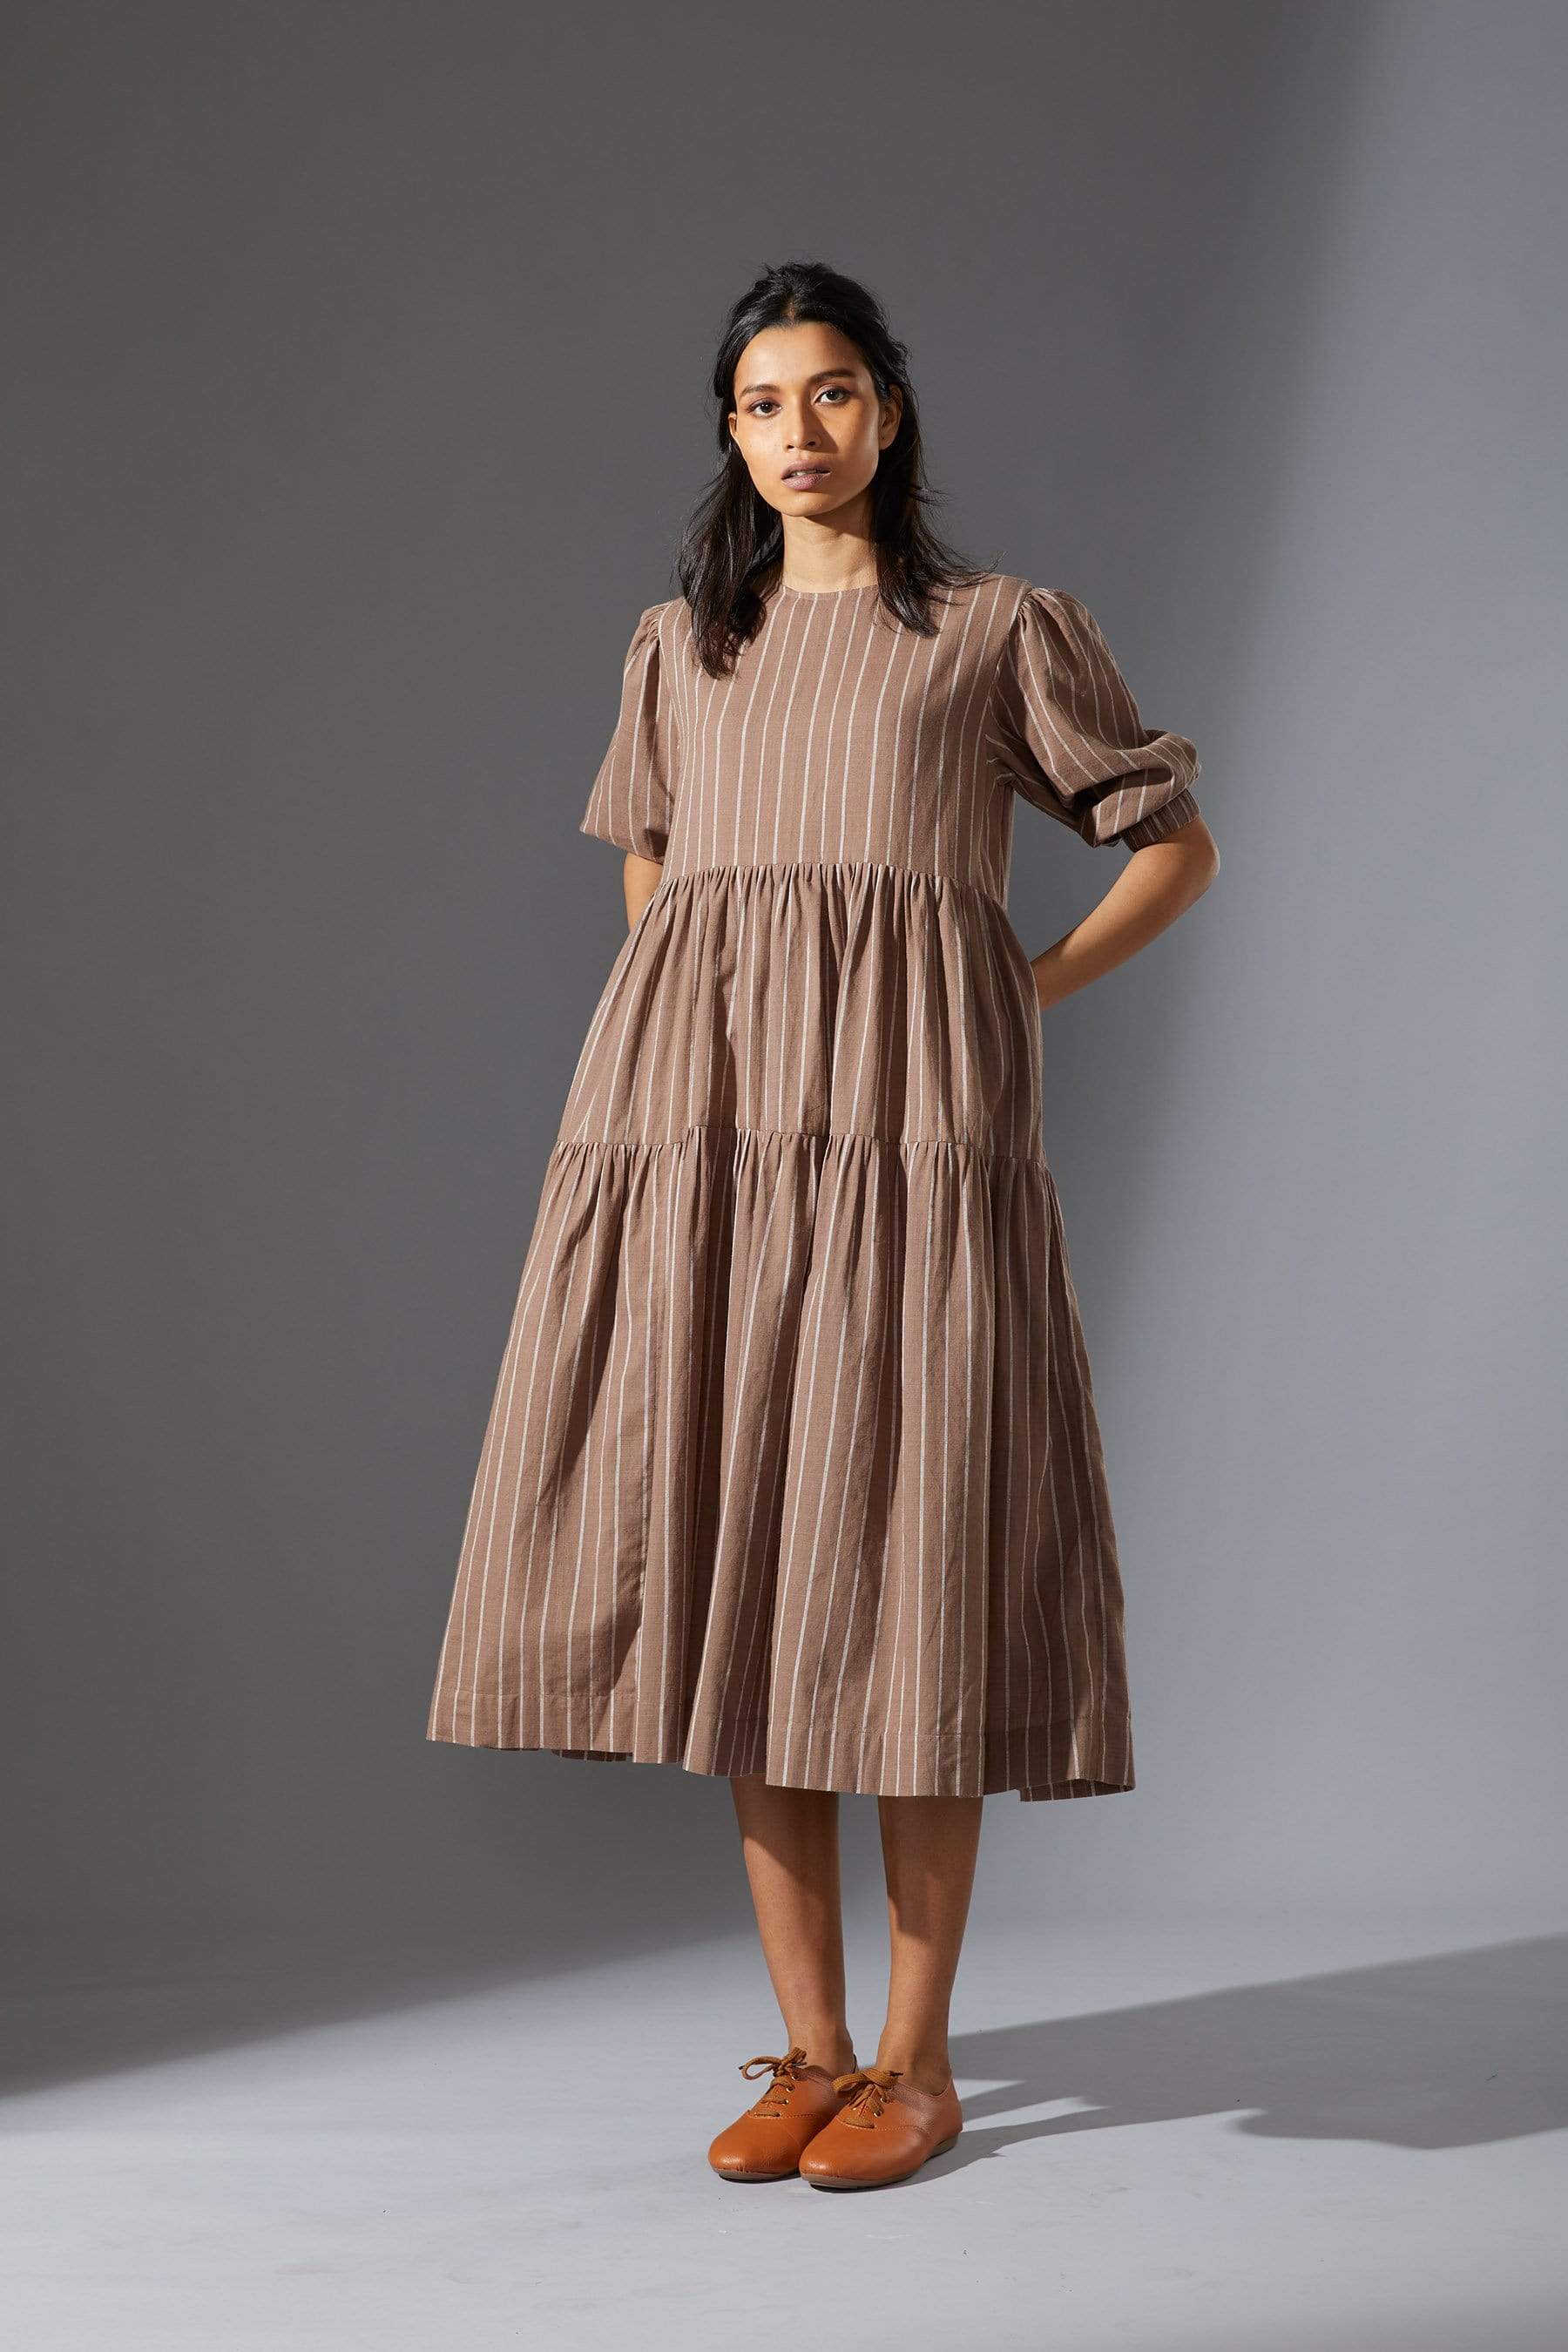 Mocha Stripe Smocked Dress - Dresses - The Calm and Collected